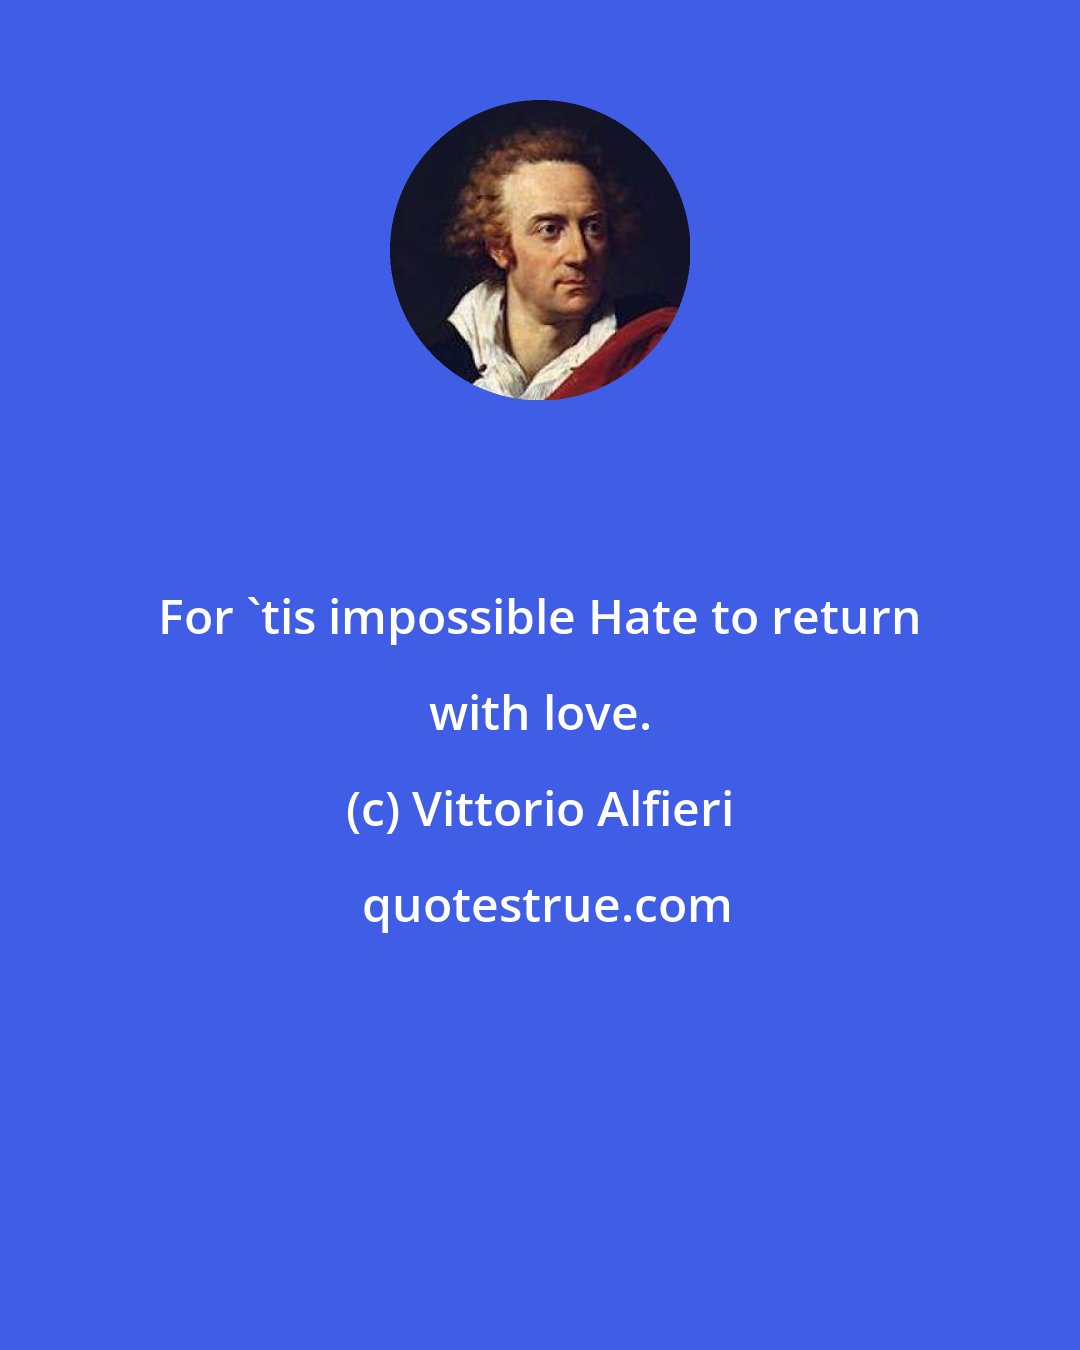 Vittorio Alfieri: For 'tis impossible Hate to return with love.